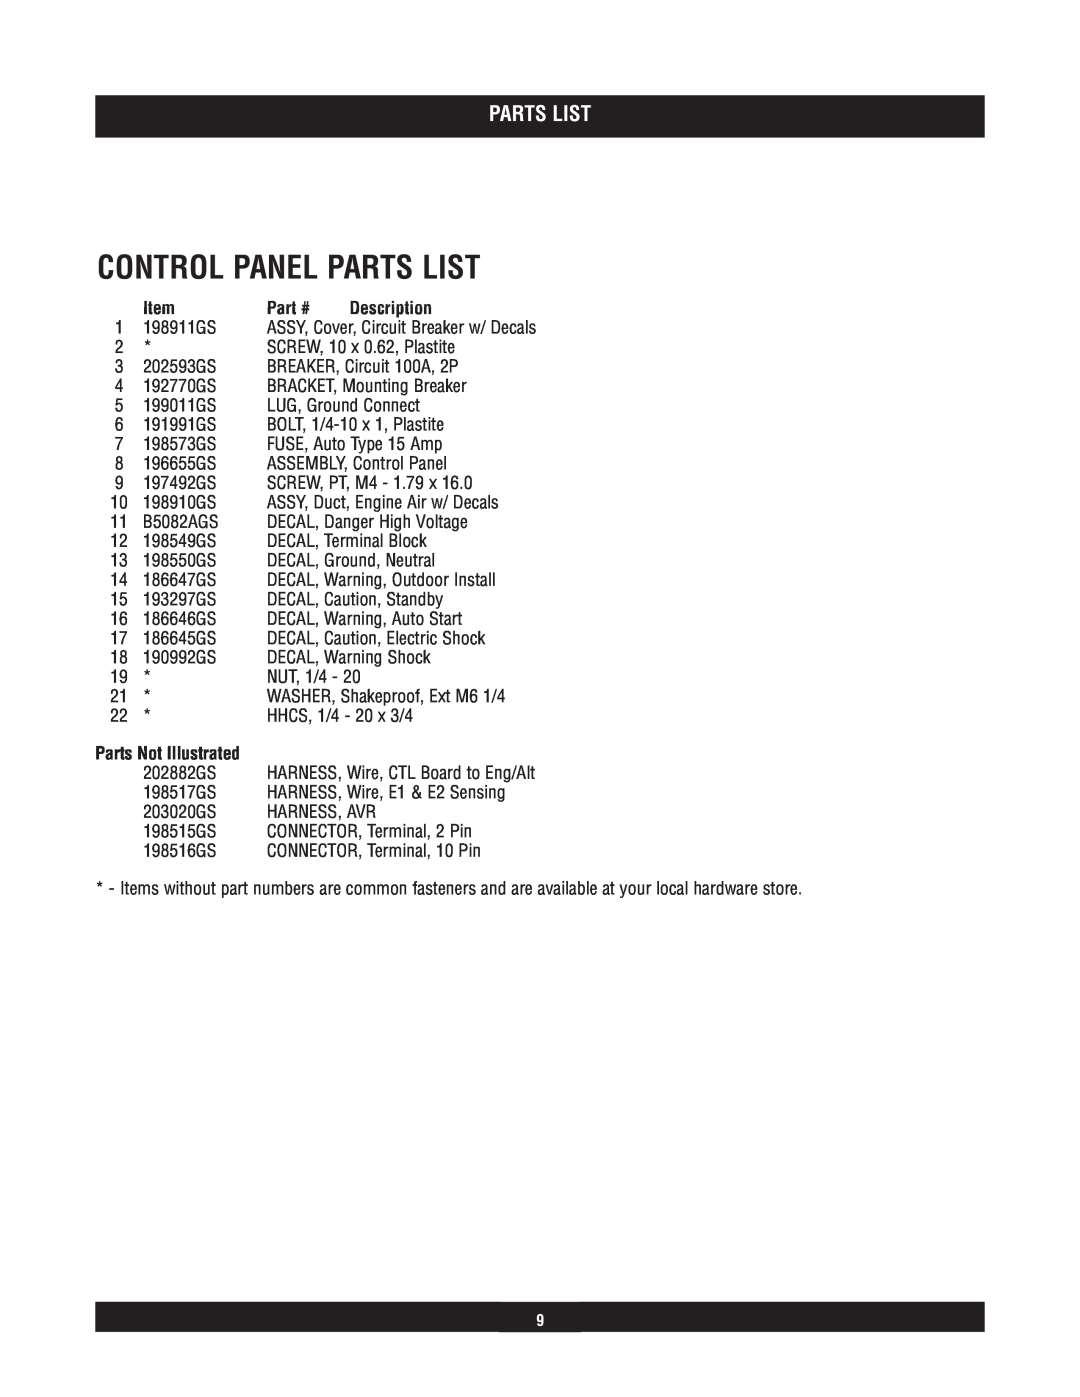 Briggs & Stratton 40211 manual Control Panel Parts List, Parts Not Illustrated 